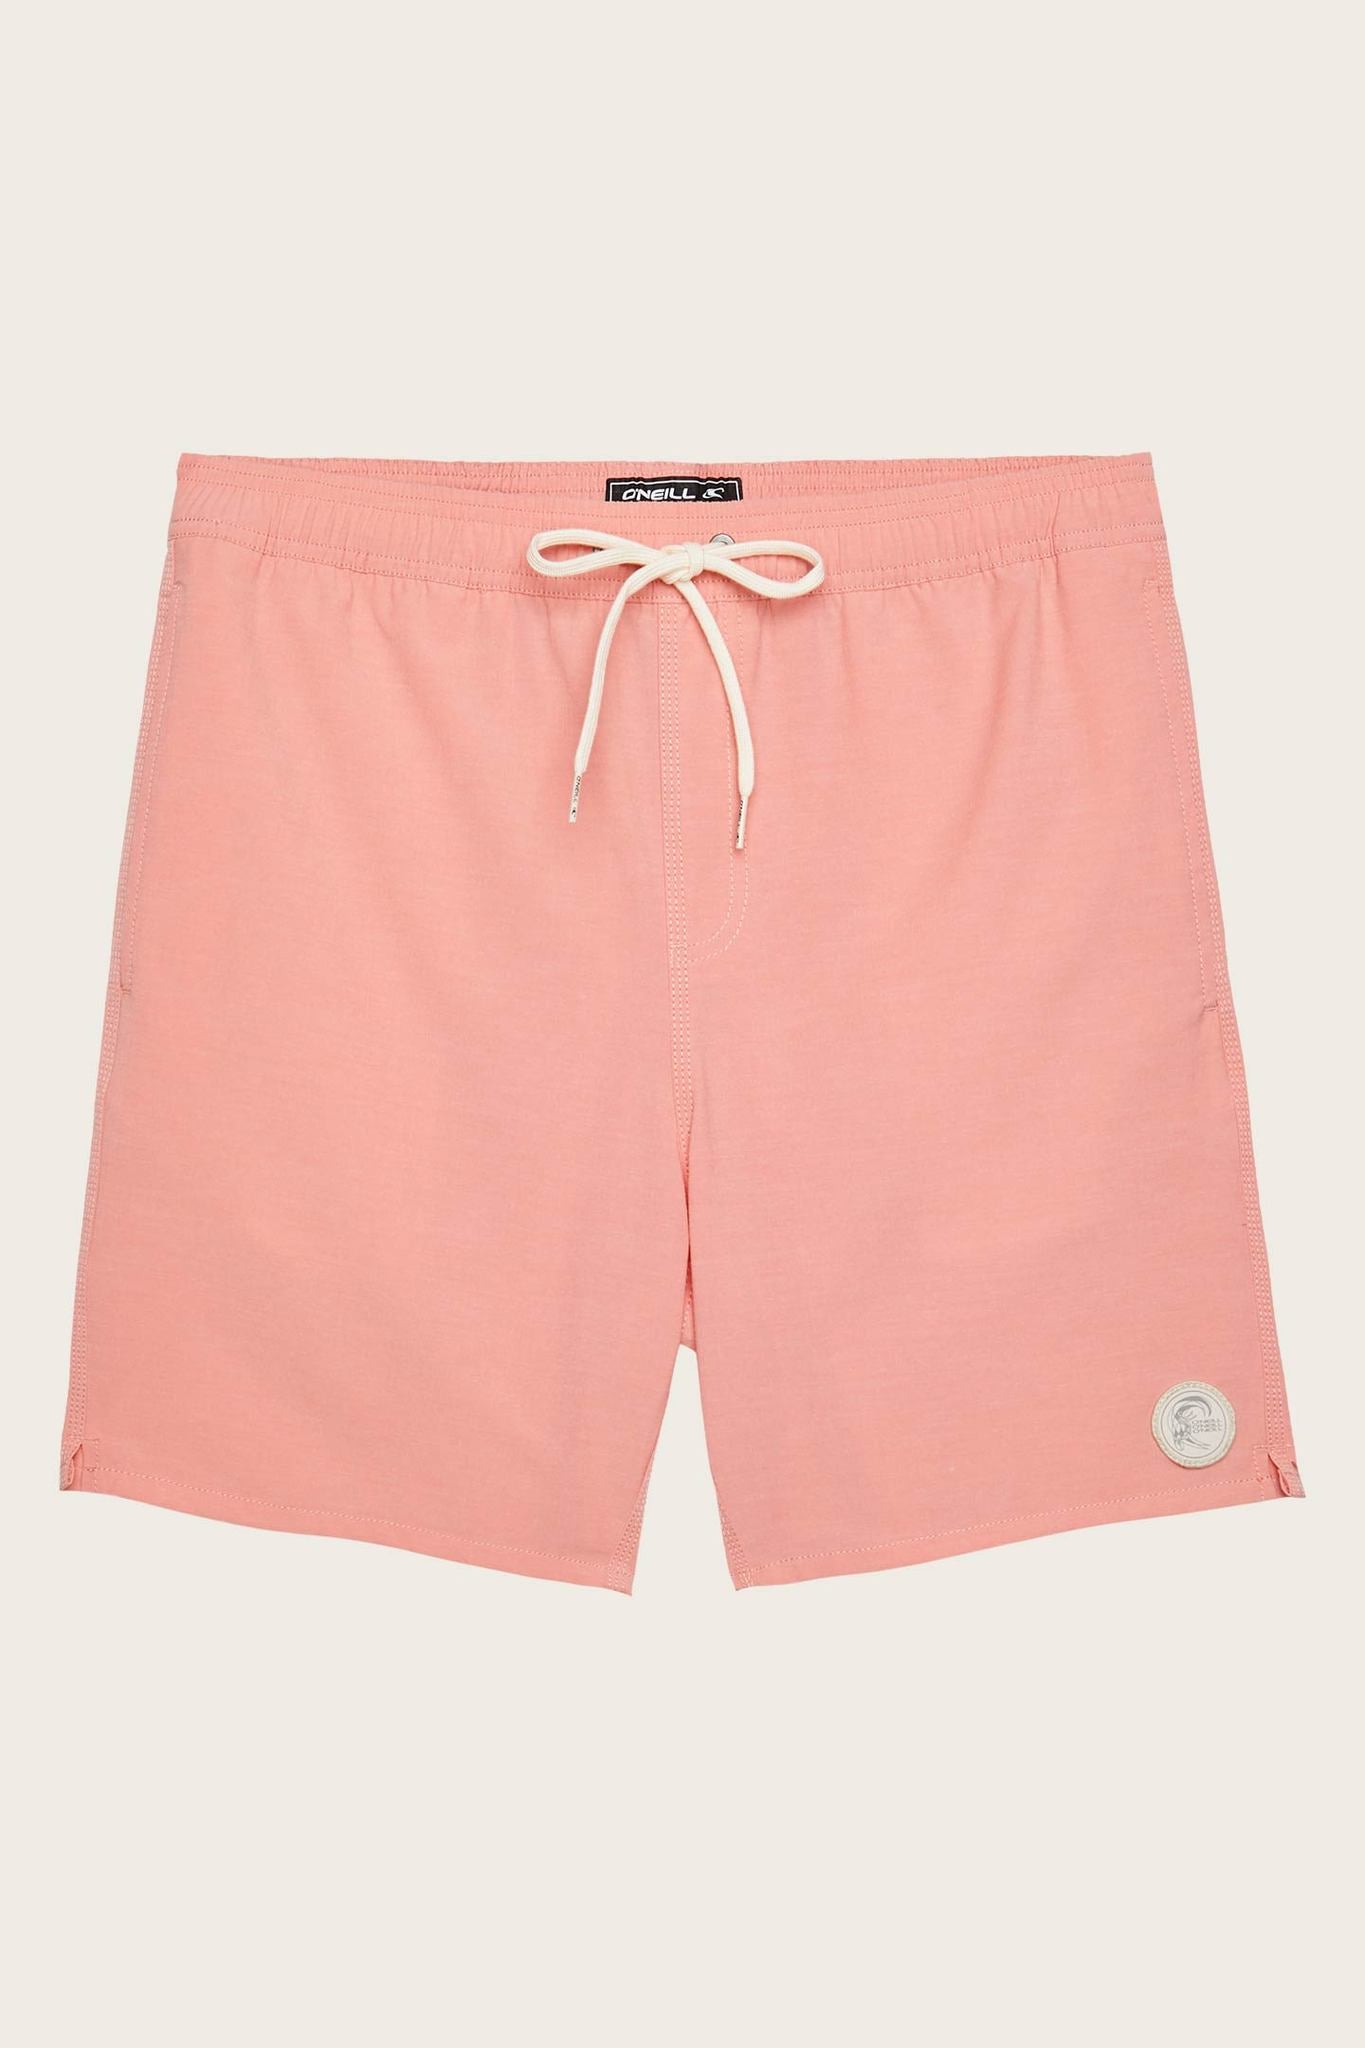 Oneill Solid Volley Short - Hot Coral Mens Shorts